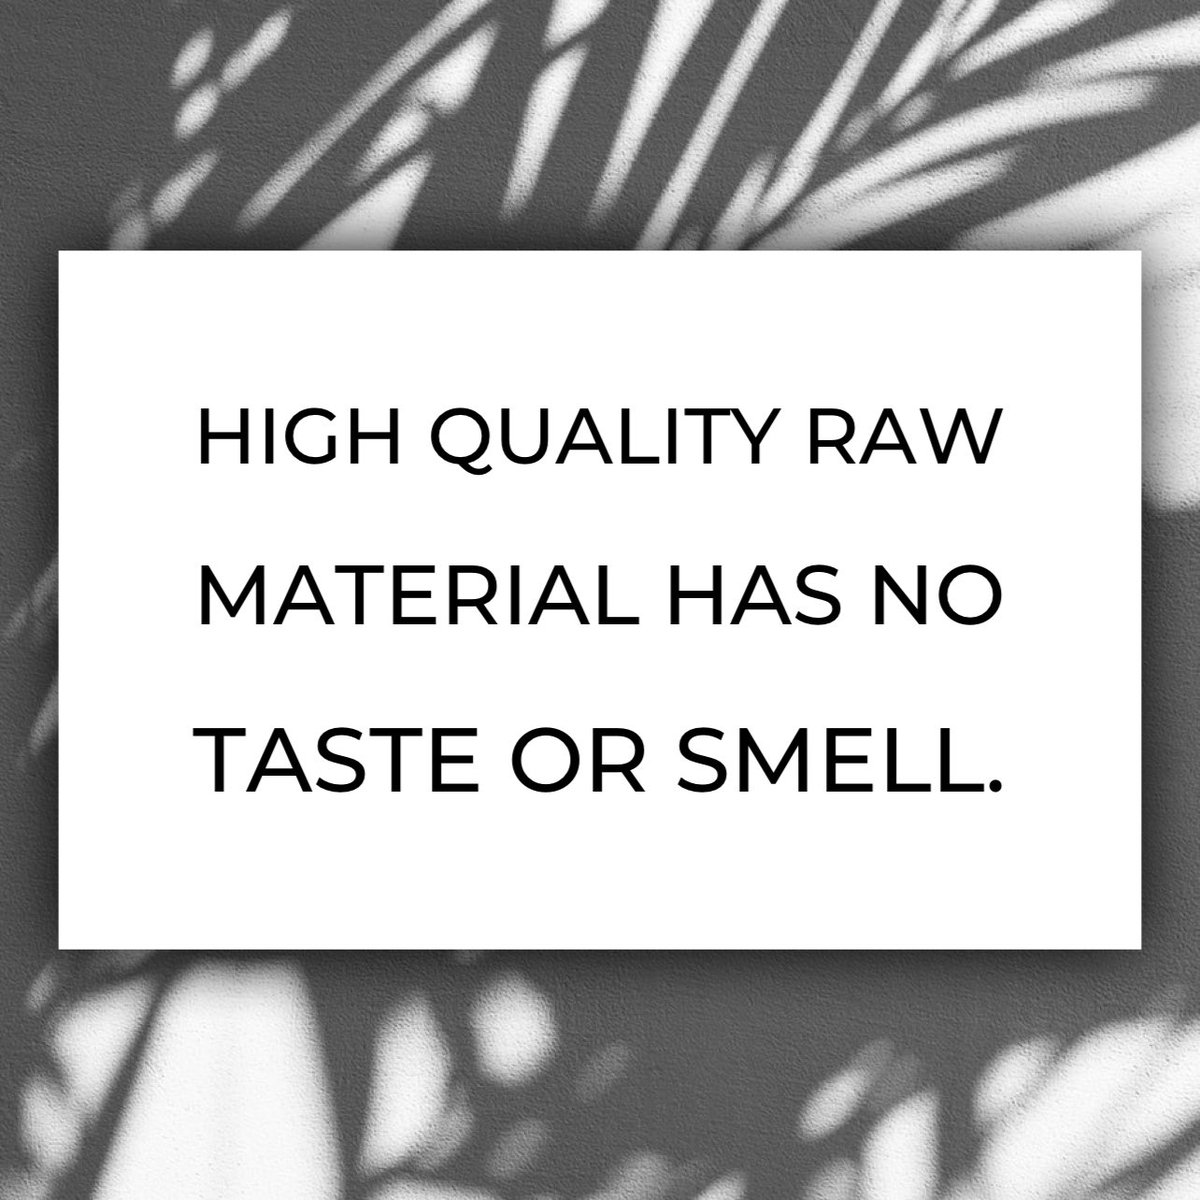 It’s ok to taste delicious flavors, rather then w33d. 

Really; it’s ok…

There’s also the part that quality means a cleaner experience :)

#MyDoseez #Doseez #MakeItADoseezDay!